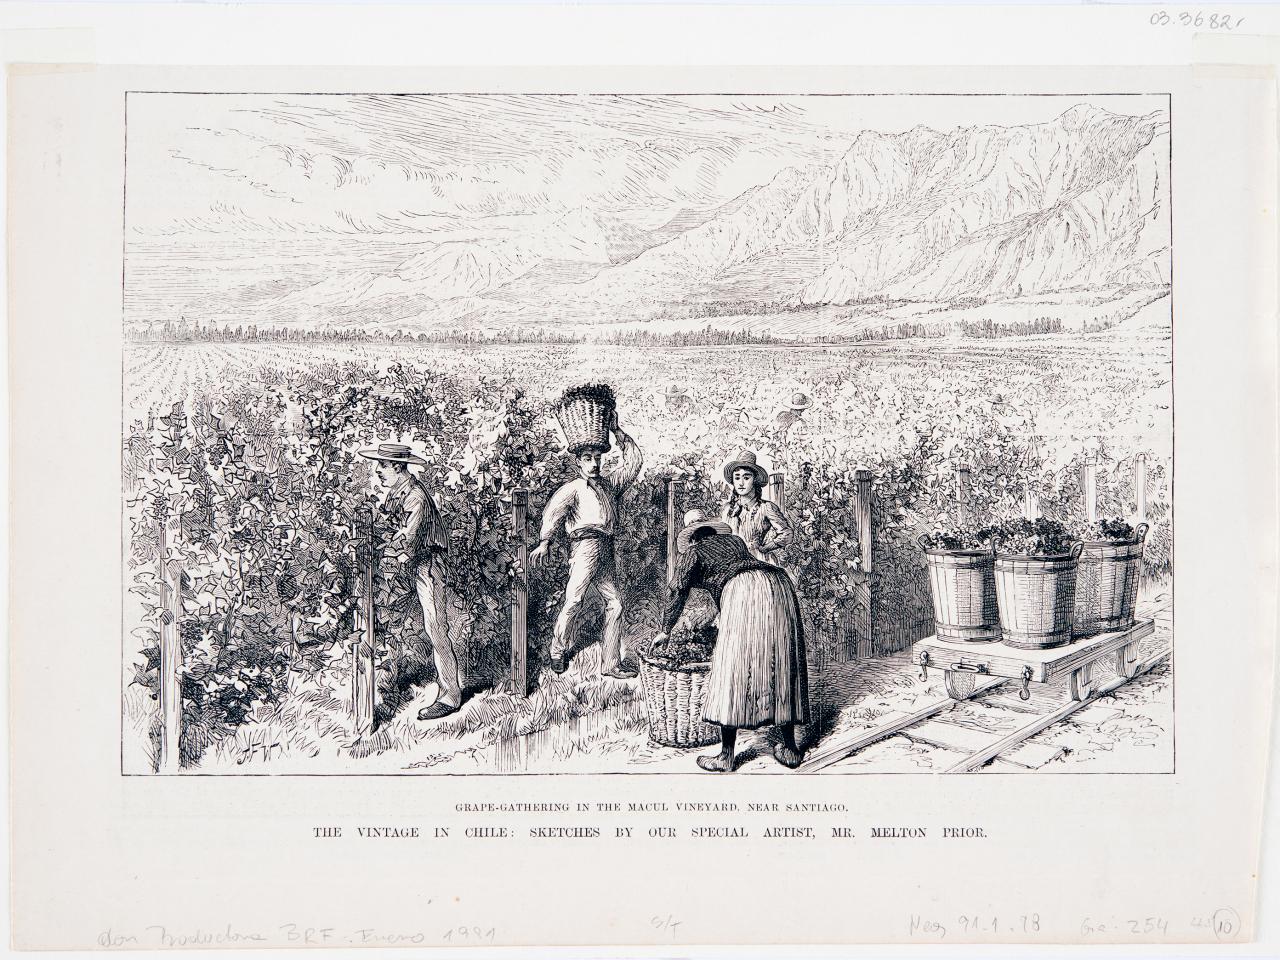 Grape Gathering in the Macul Vineyard, near Santiago. The vintage in Chile- Sketches by our Special Artist, Mr. Melton Prior